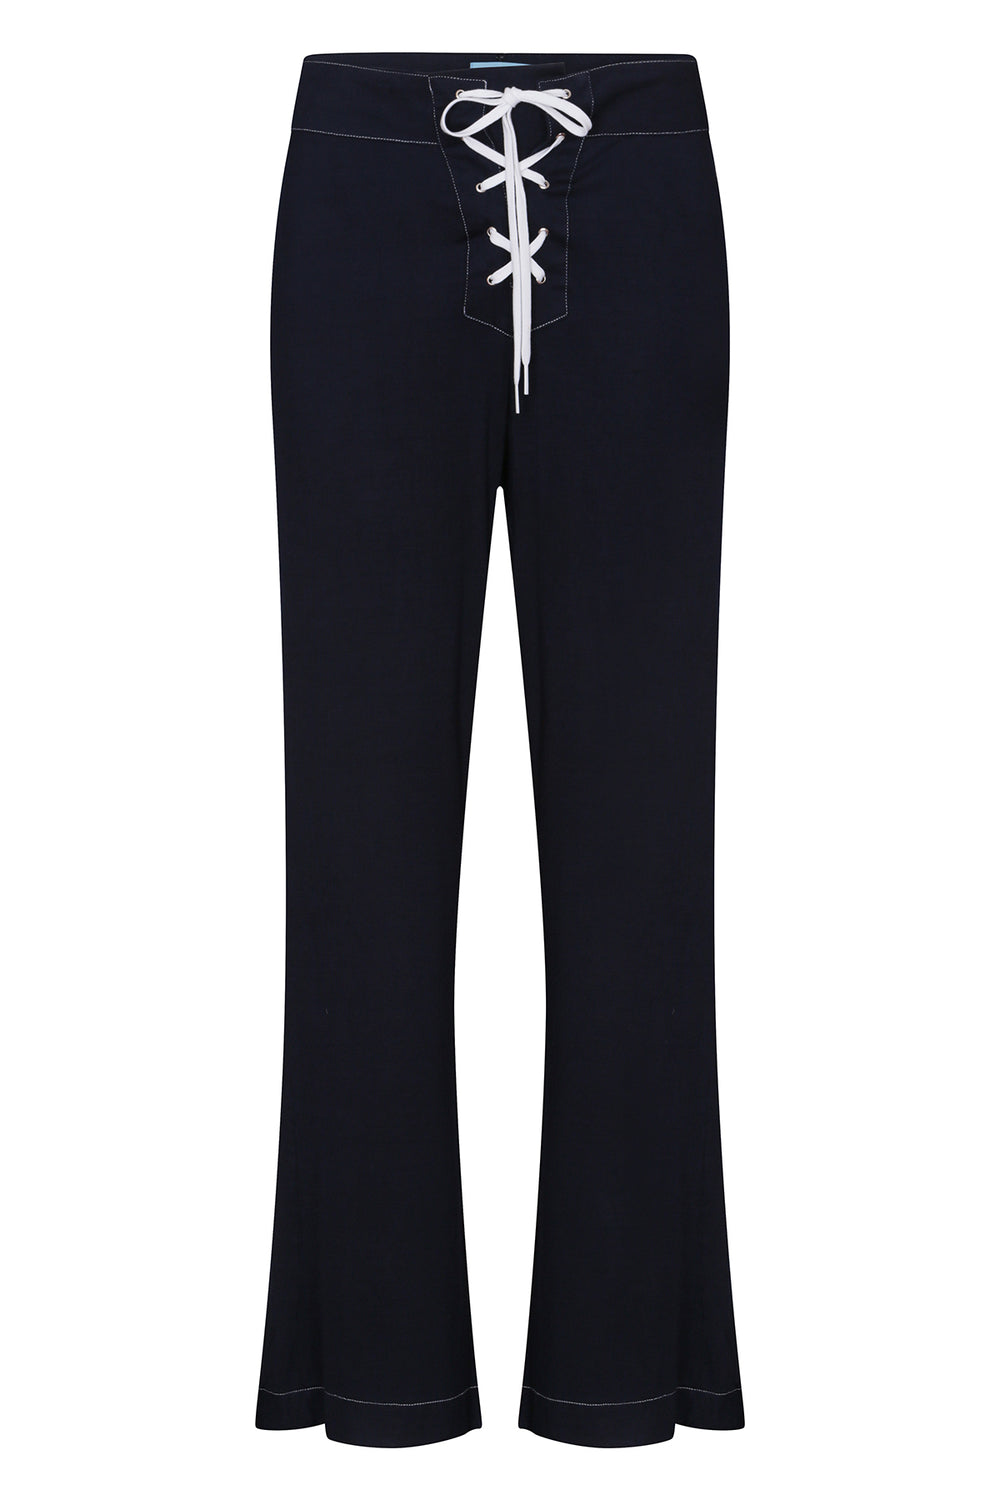 Criss-Cross Trousers - noemotions-store